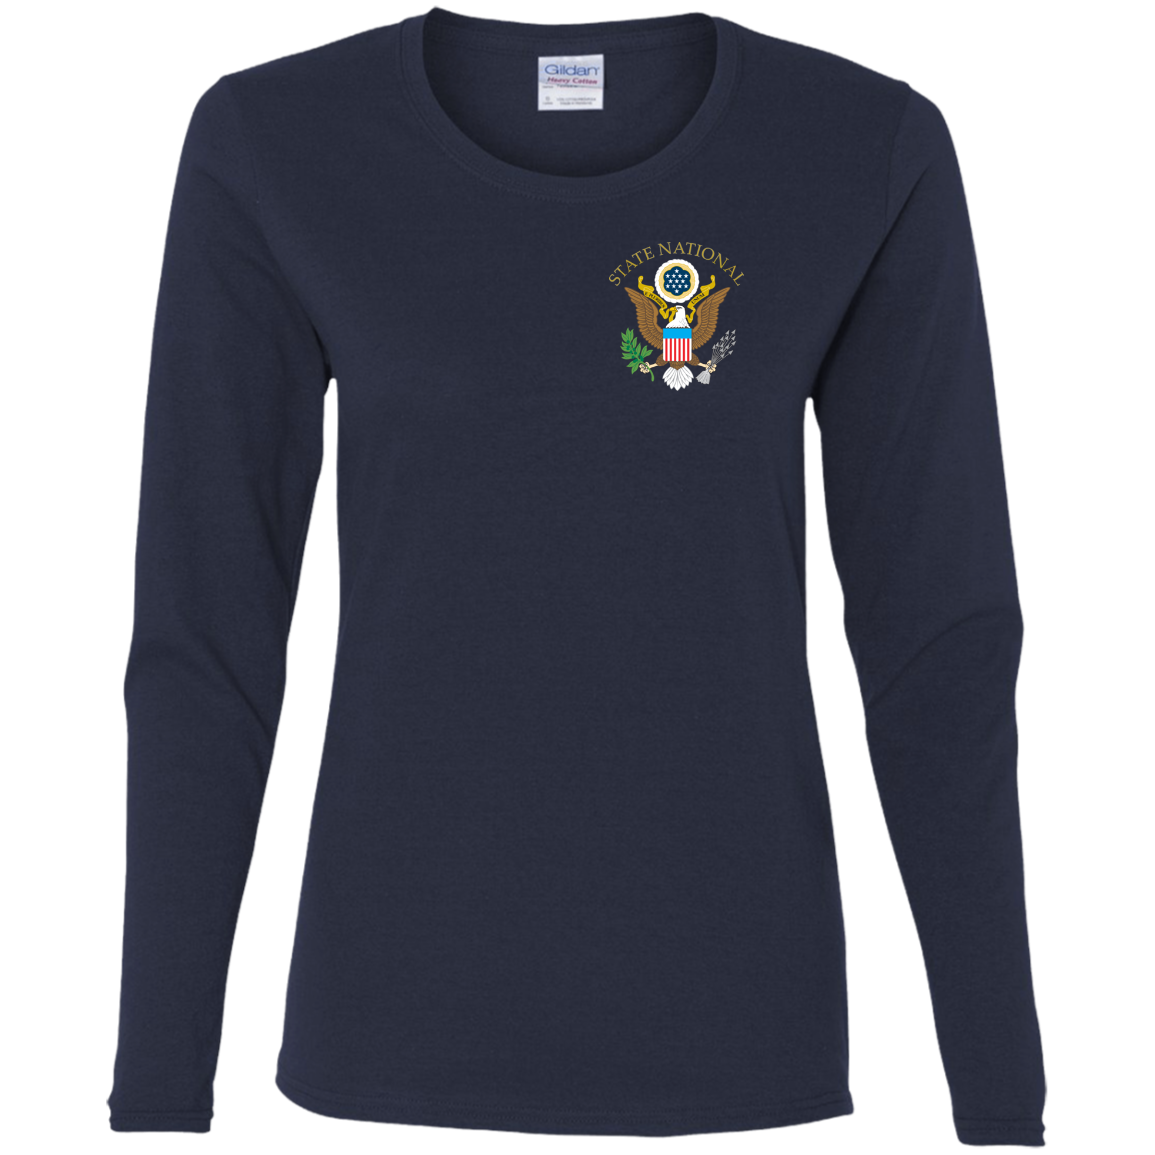 Ladies State National Long Sleeve T-Shirt